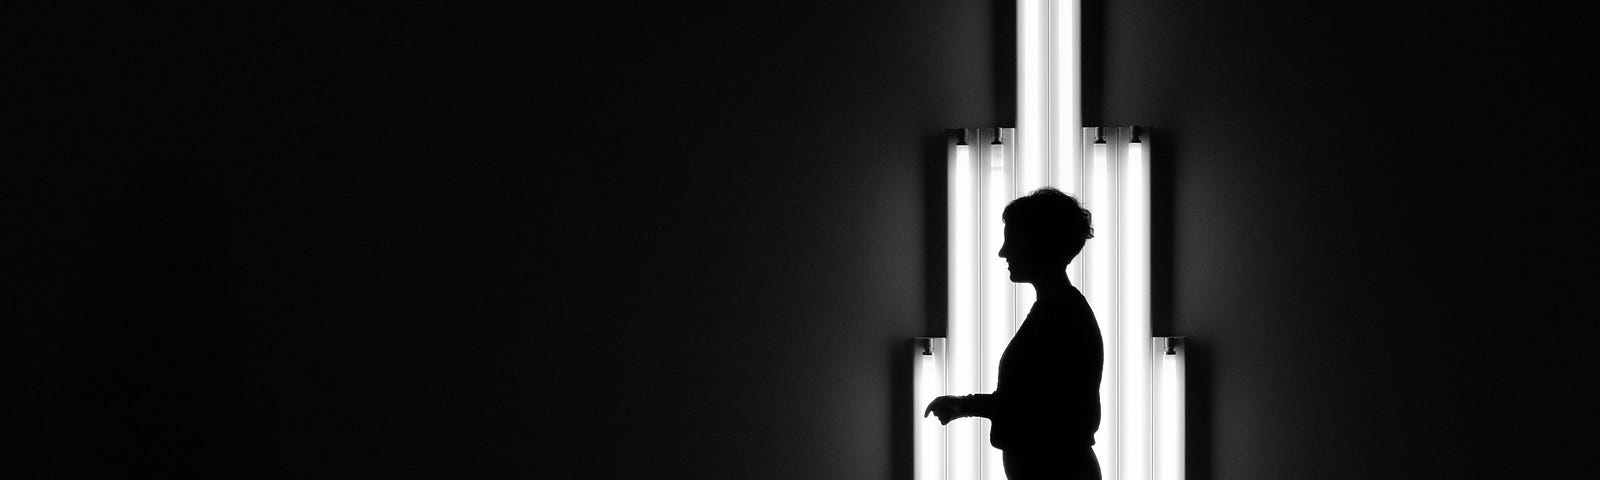 A figure stands silhouetted against an art installation of fluorescent tubes